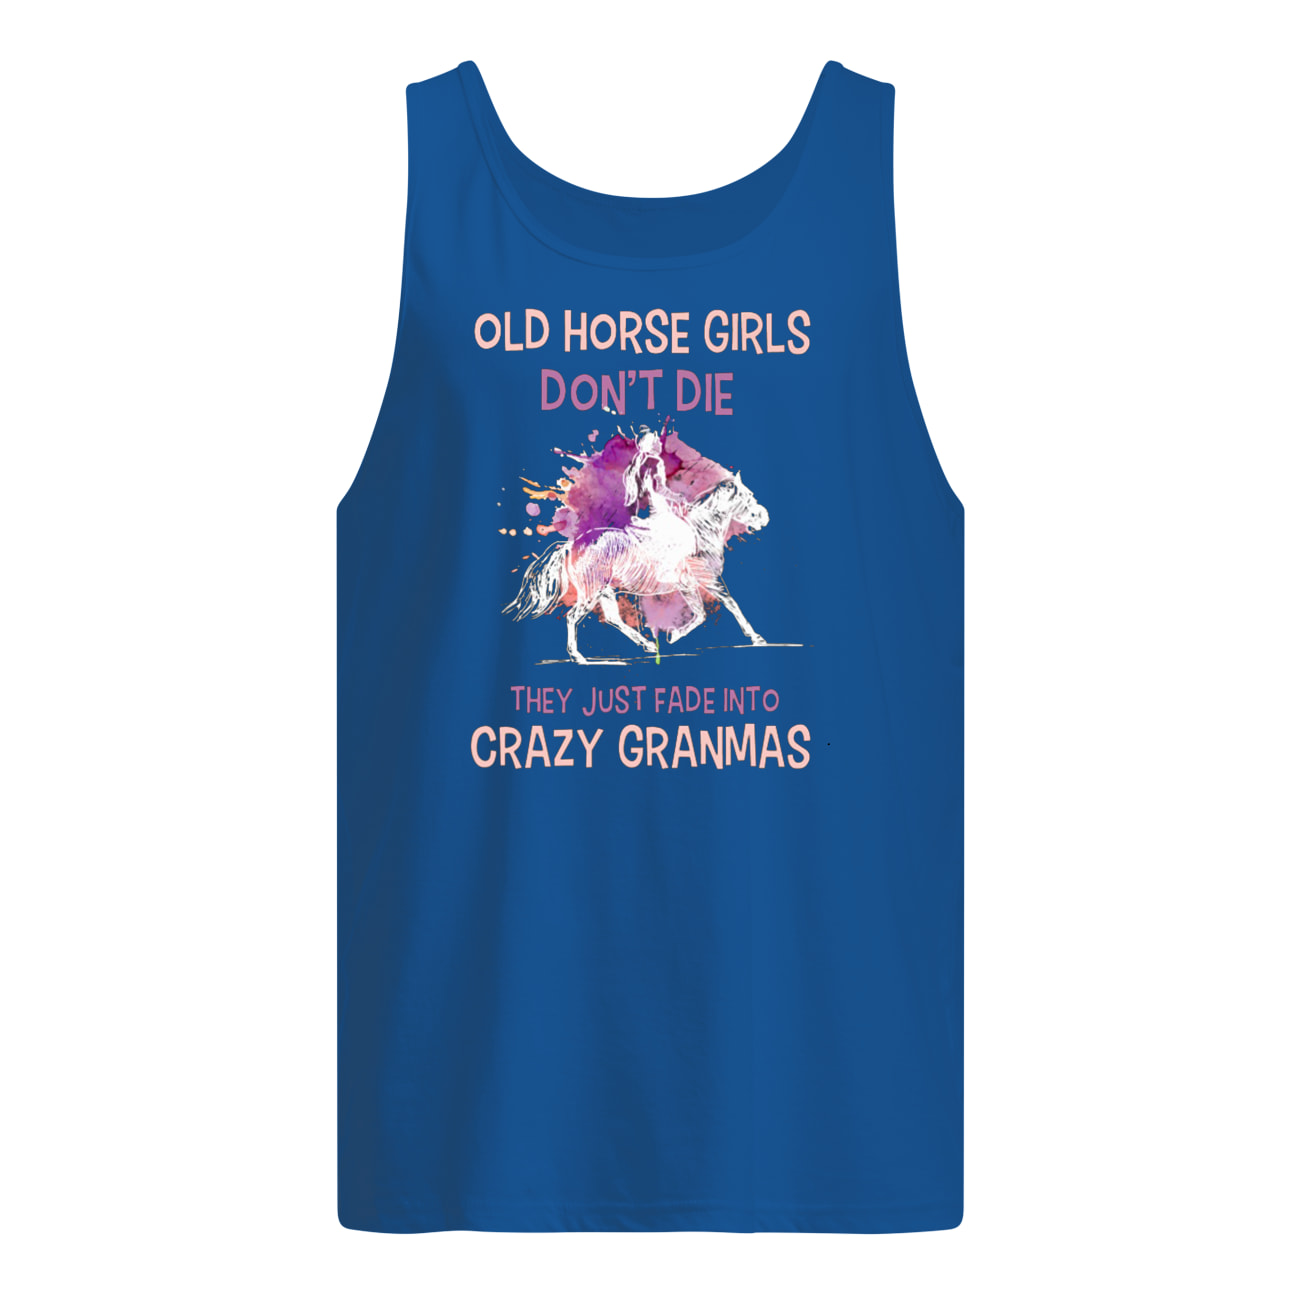 Old horse girls don't die they just fade into crazy granmas tank top